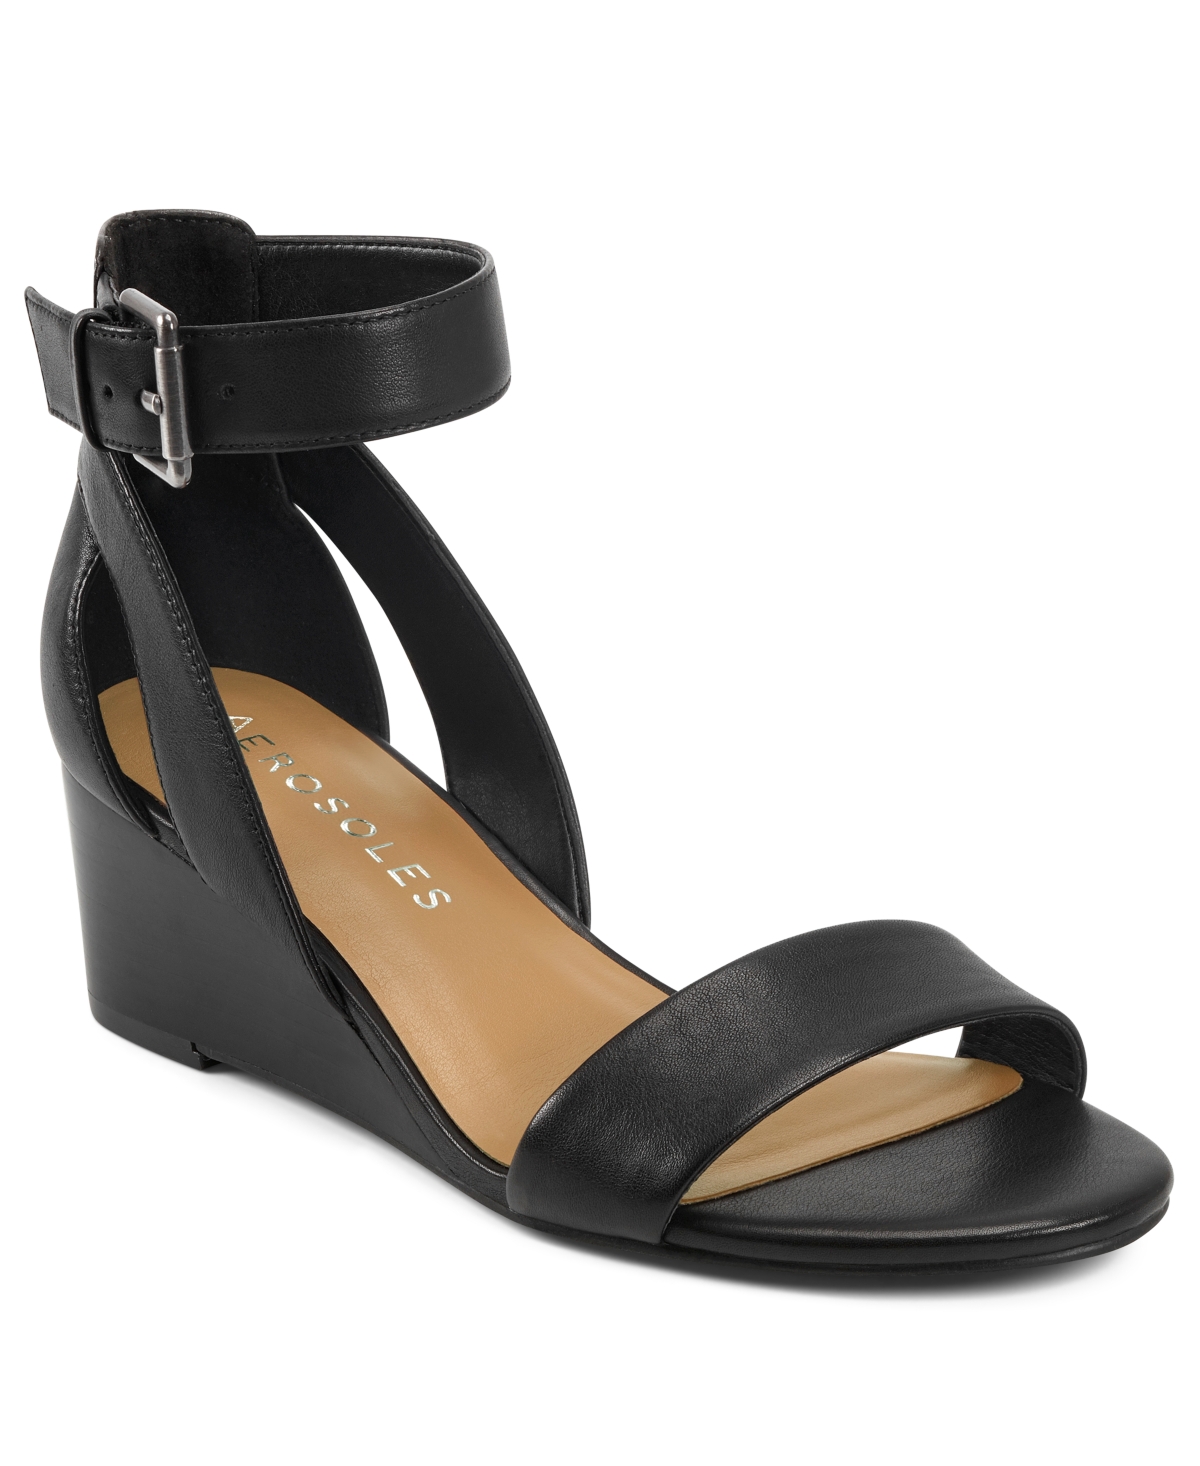 UPC 887039887419 product image for Aerosoles Willowbrook Wedge Sandals Women's Shoes | upcitemdb.com